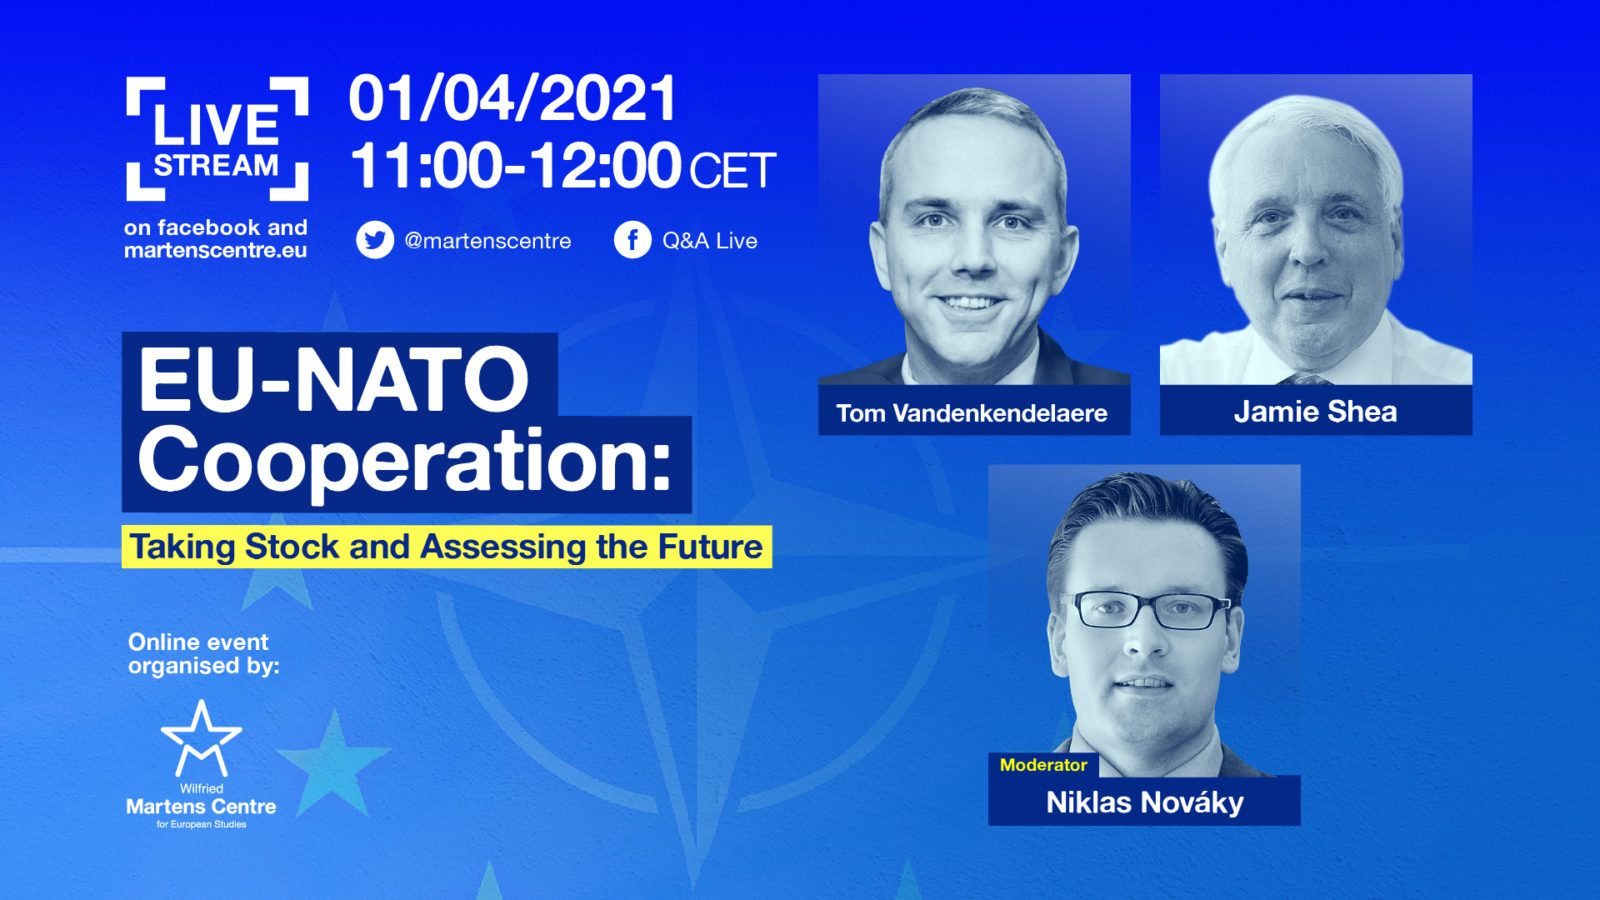 EU-NATO Cooperation: Taking Stock and Assessing the Future